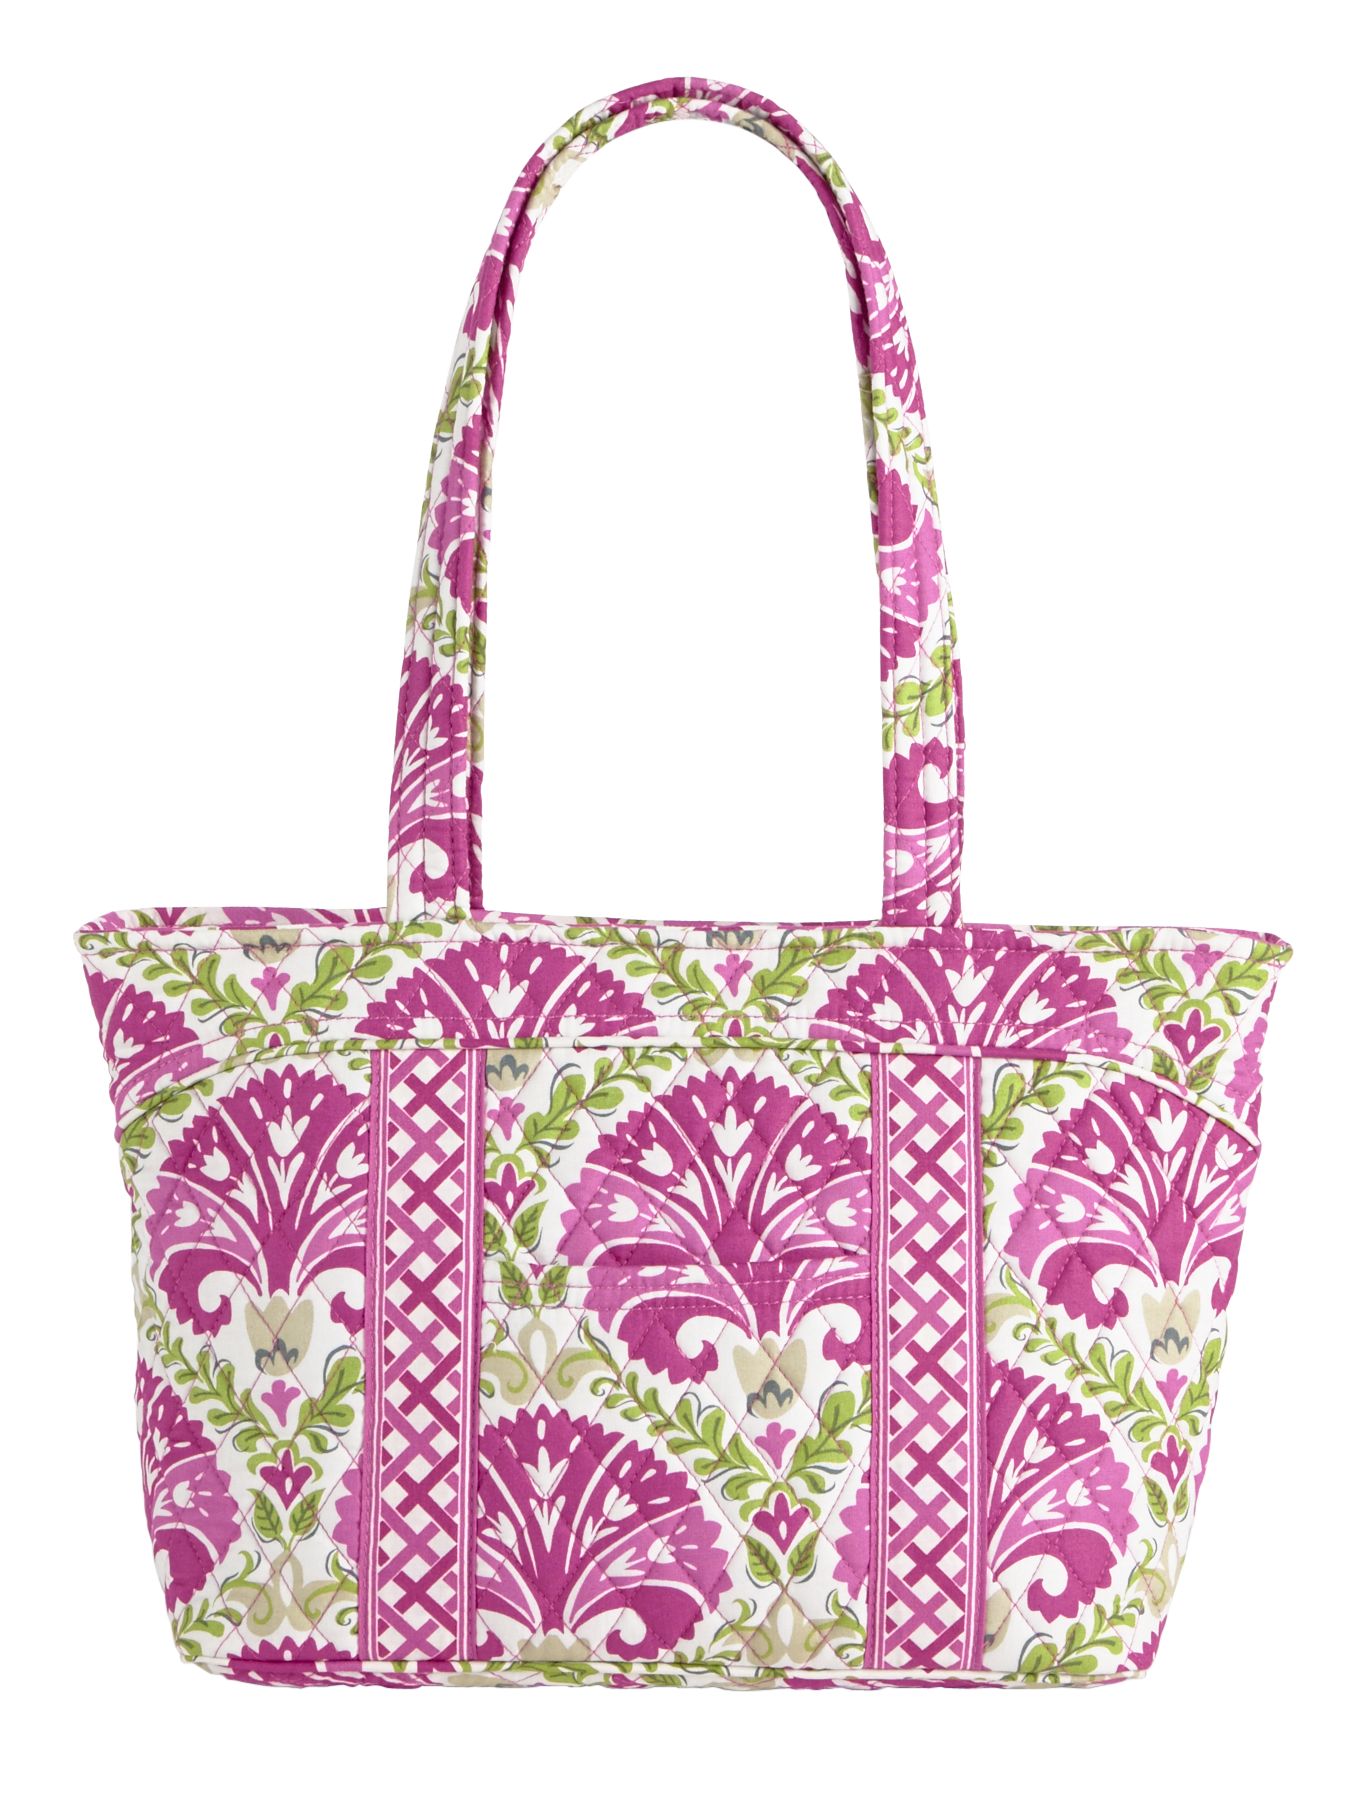 Details about NEW Vera Bradley Mandy in Julep Tulip NWT MSRP 70.00